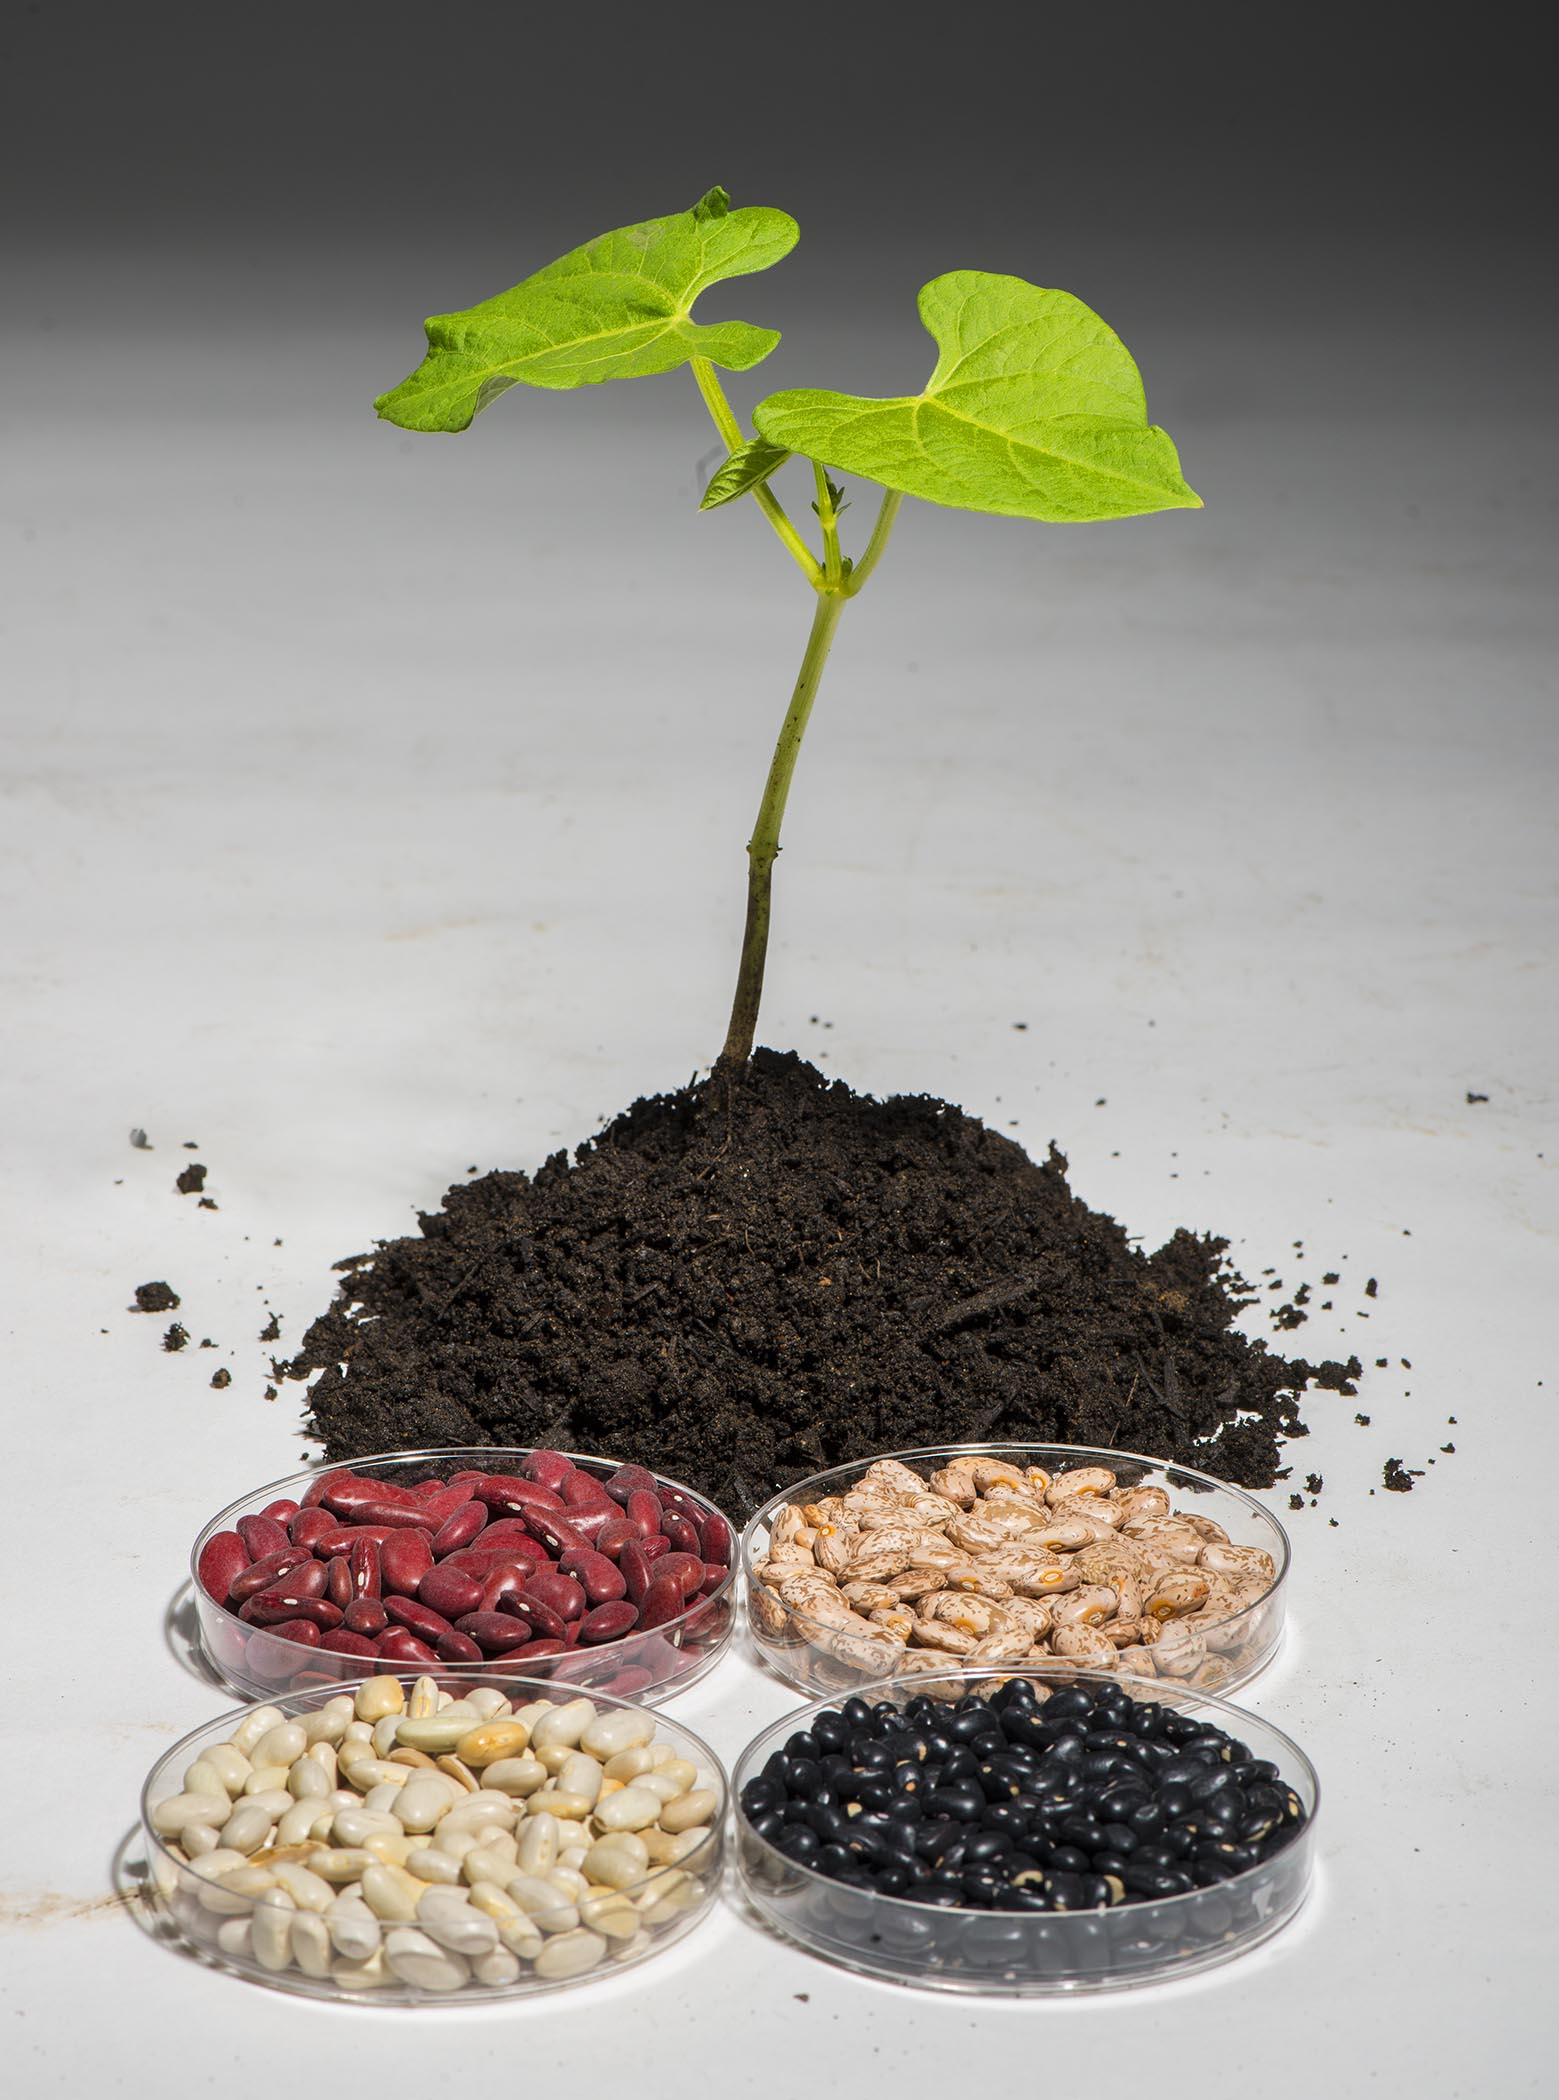 A common bean plant sits in the middle of a variety of dried beans.